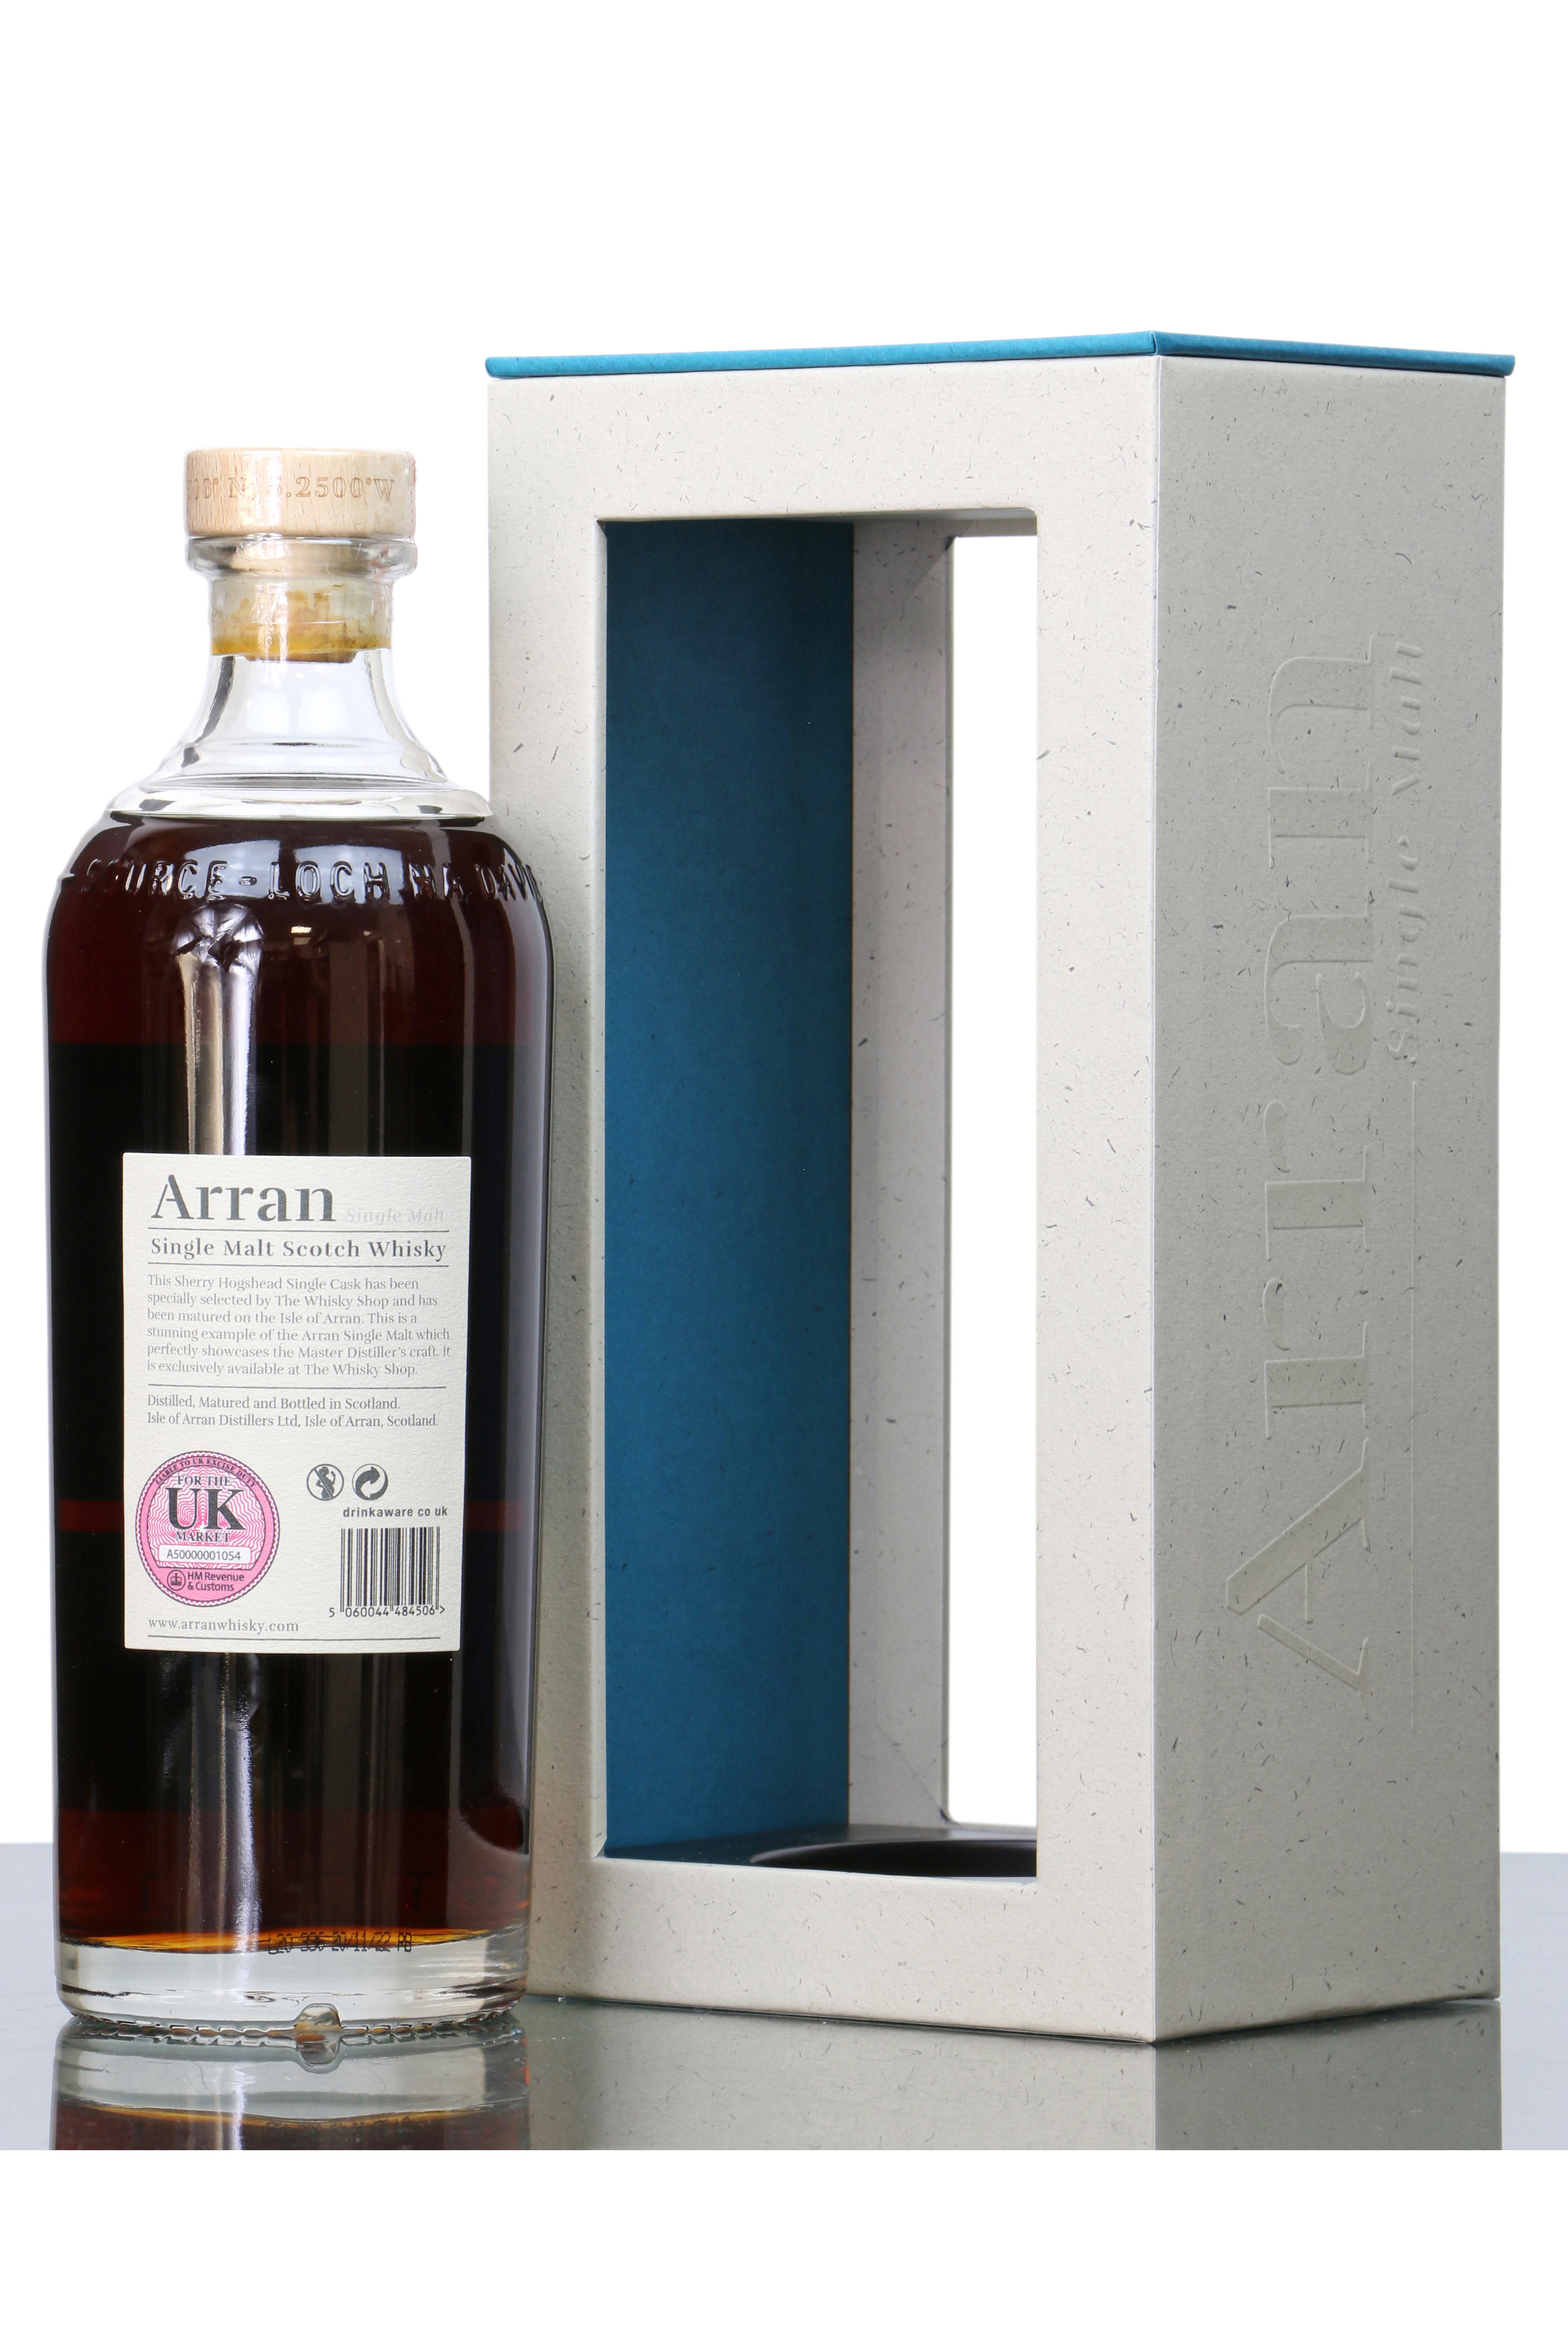 Arran 24 Years Old 1996 - The Whisky Shop Premium Cask No.1996/736